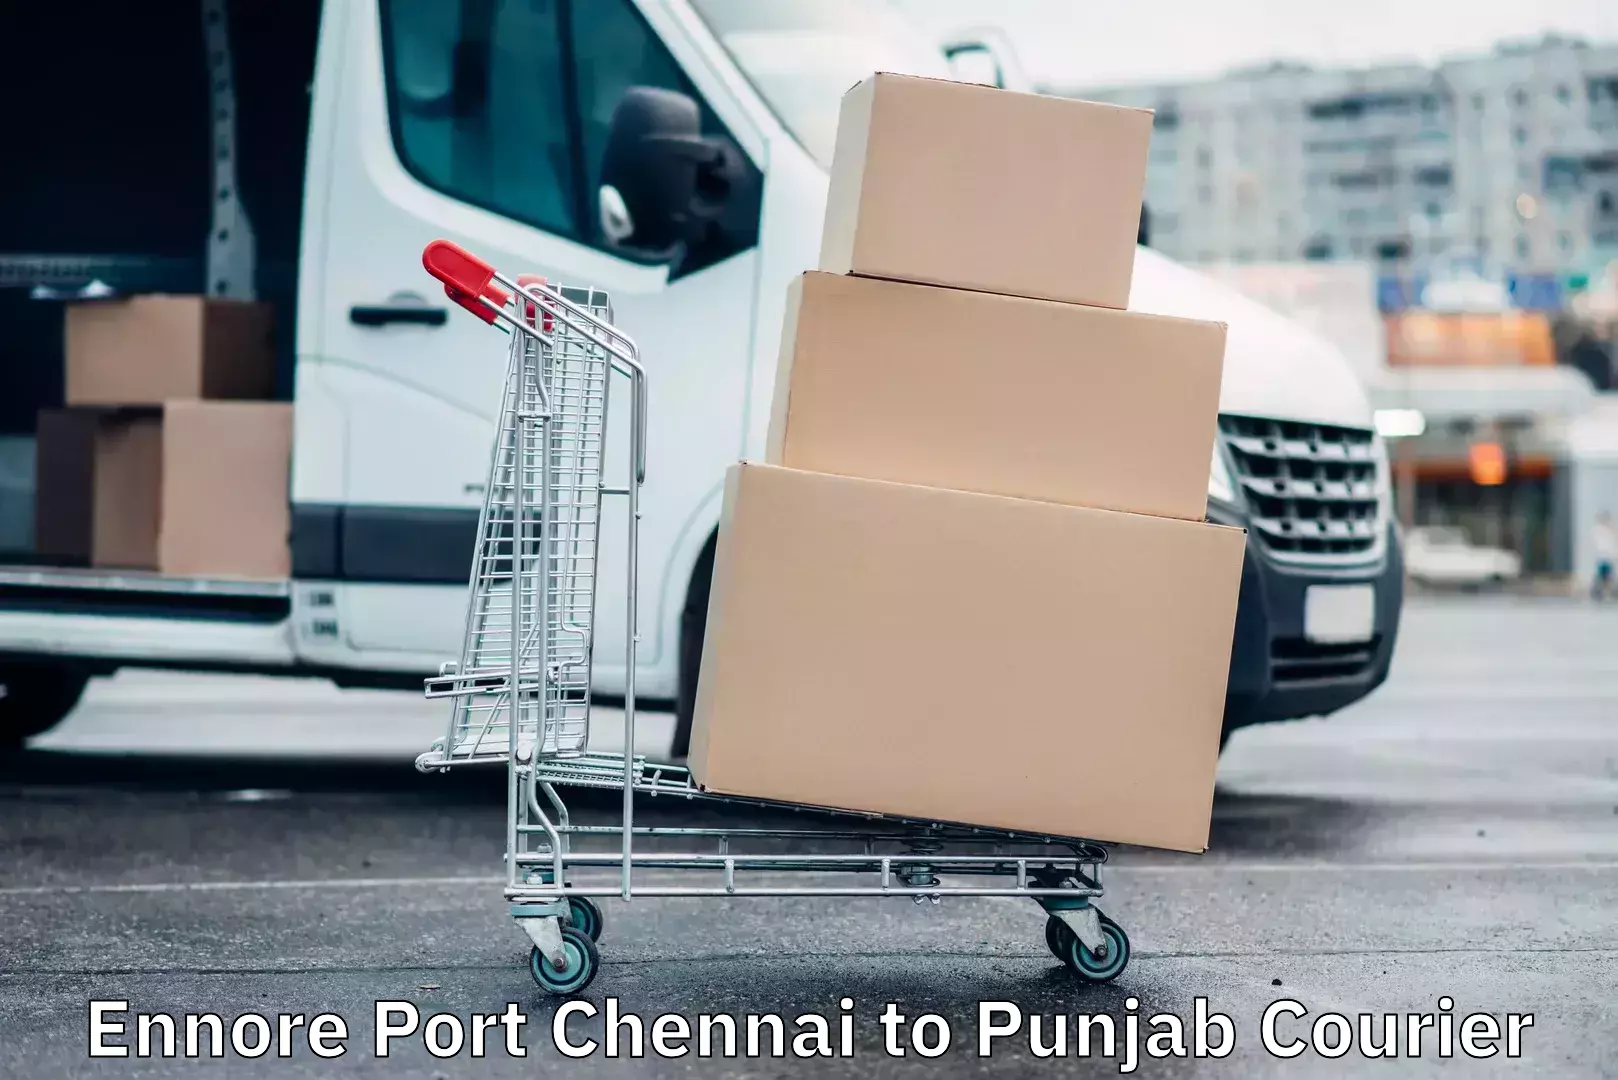 Premium courier solutions Ennore Port Chennai to Punjab